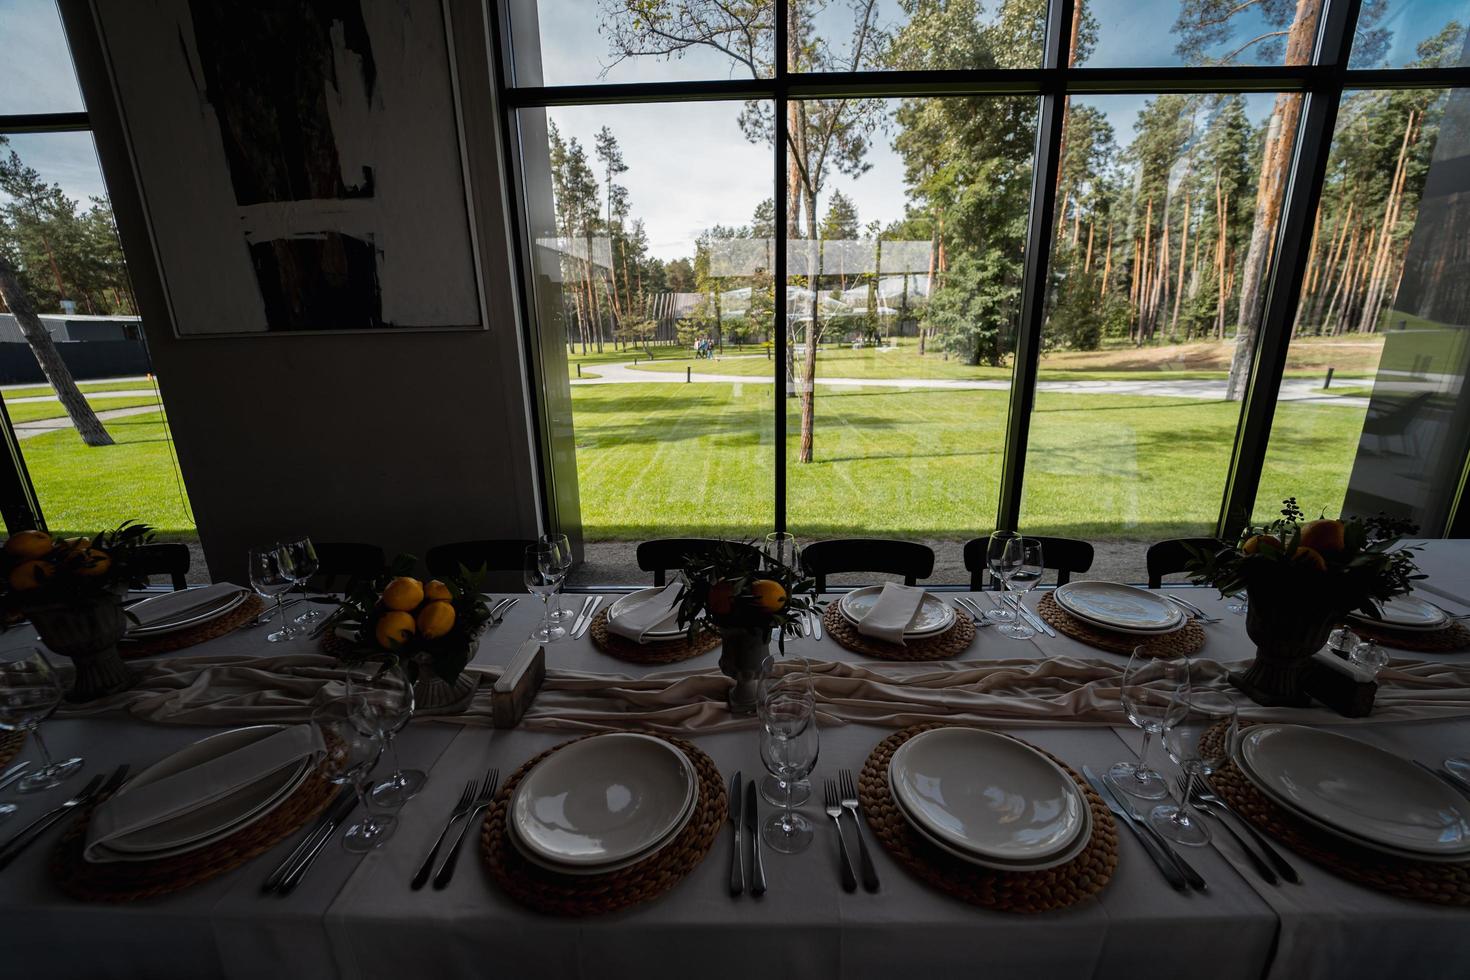 View of the lawn through the window of the banquet hall photo